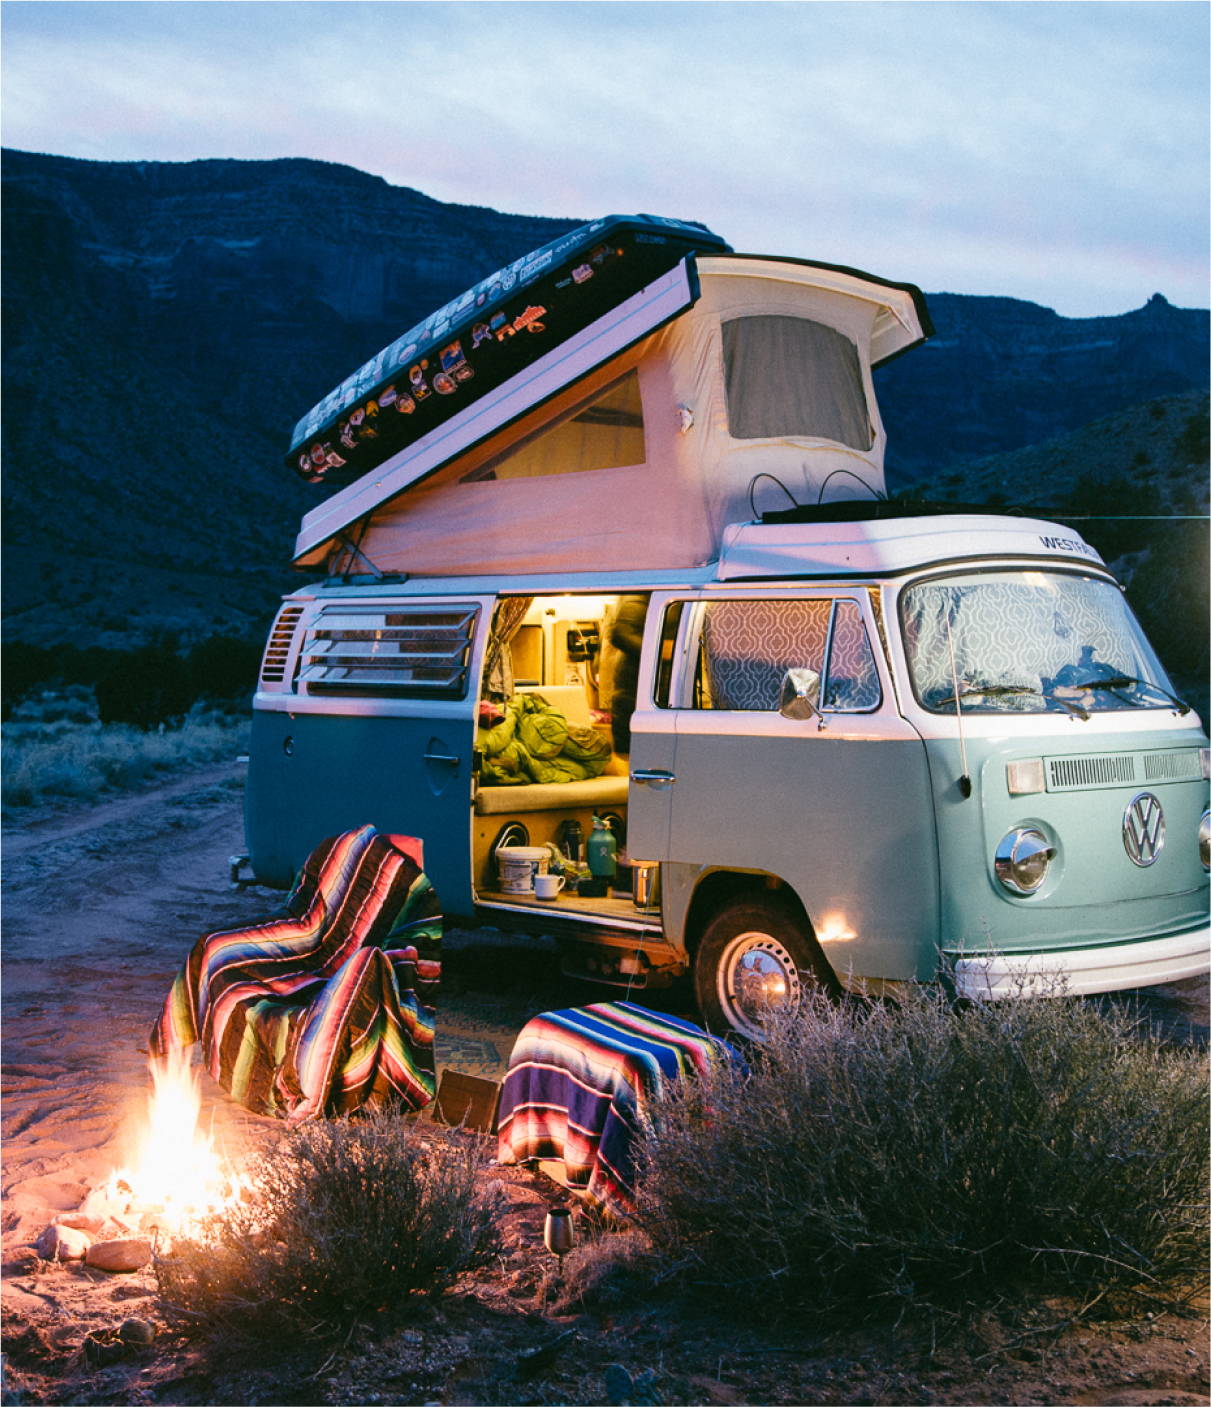 a camper van with a campfire in the foreground